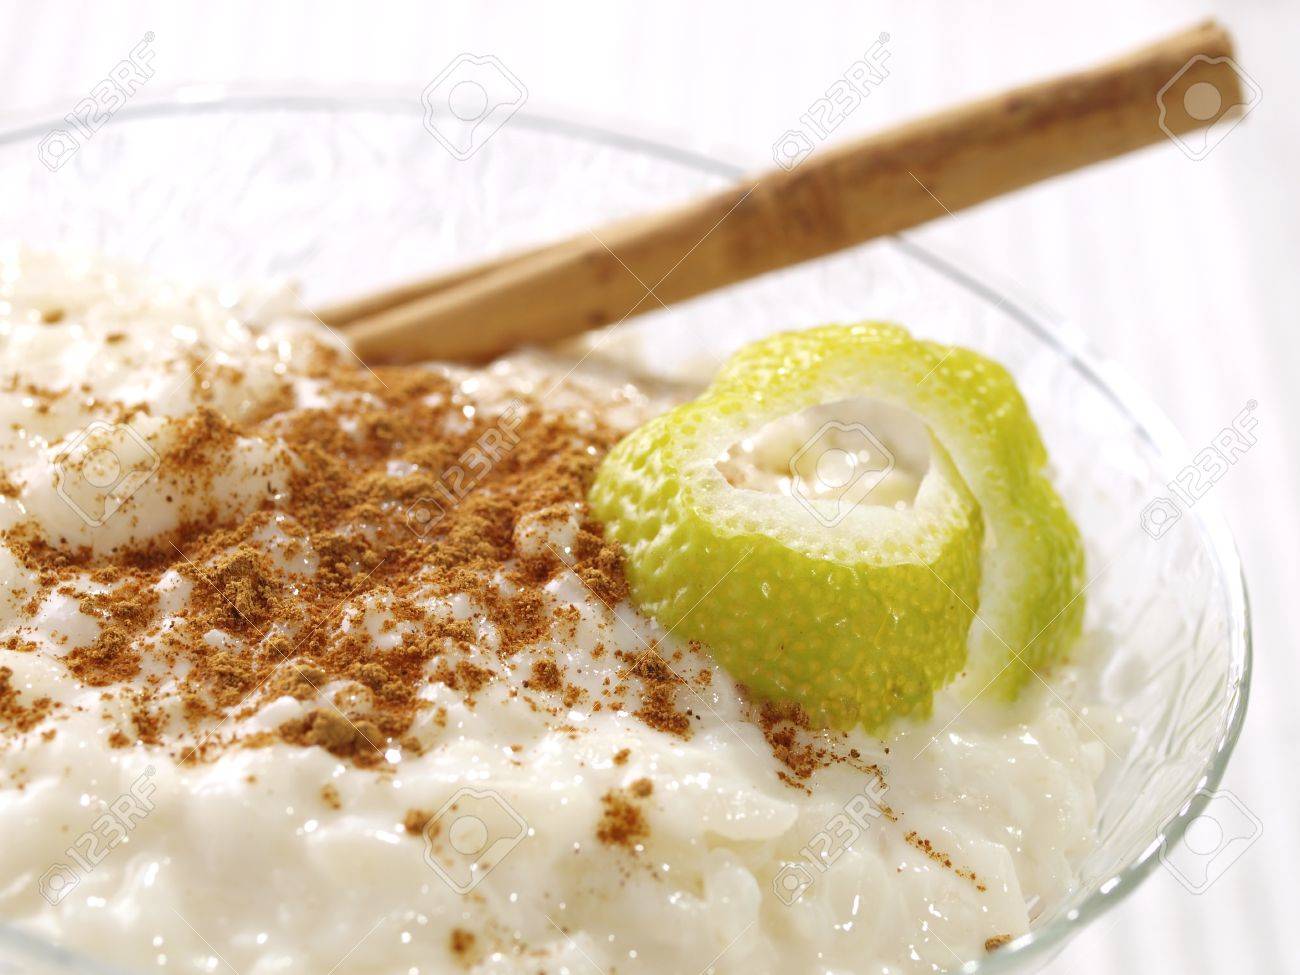 15544305-rice-pudding-–-arroz-con-leche-spanish-version-of-the-rice-pudding-made-with-milk-rice-sugar-and-cin